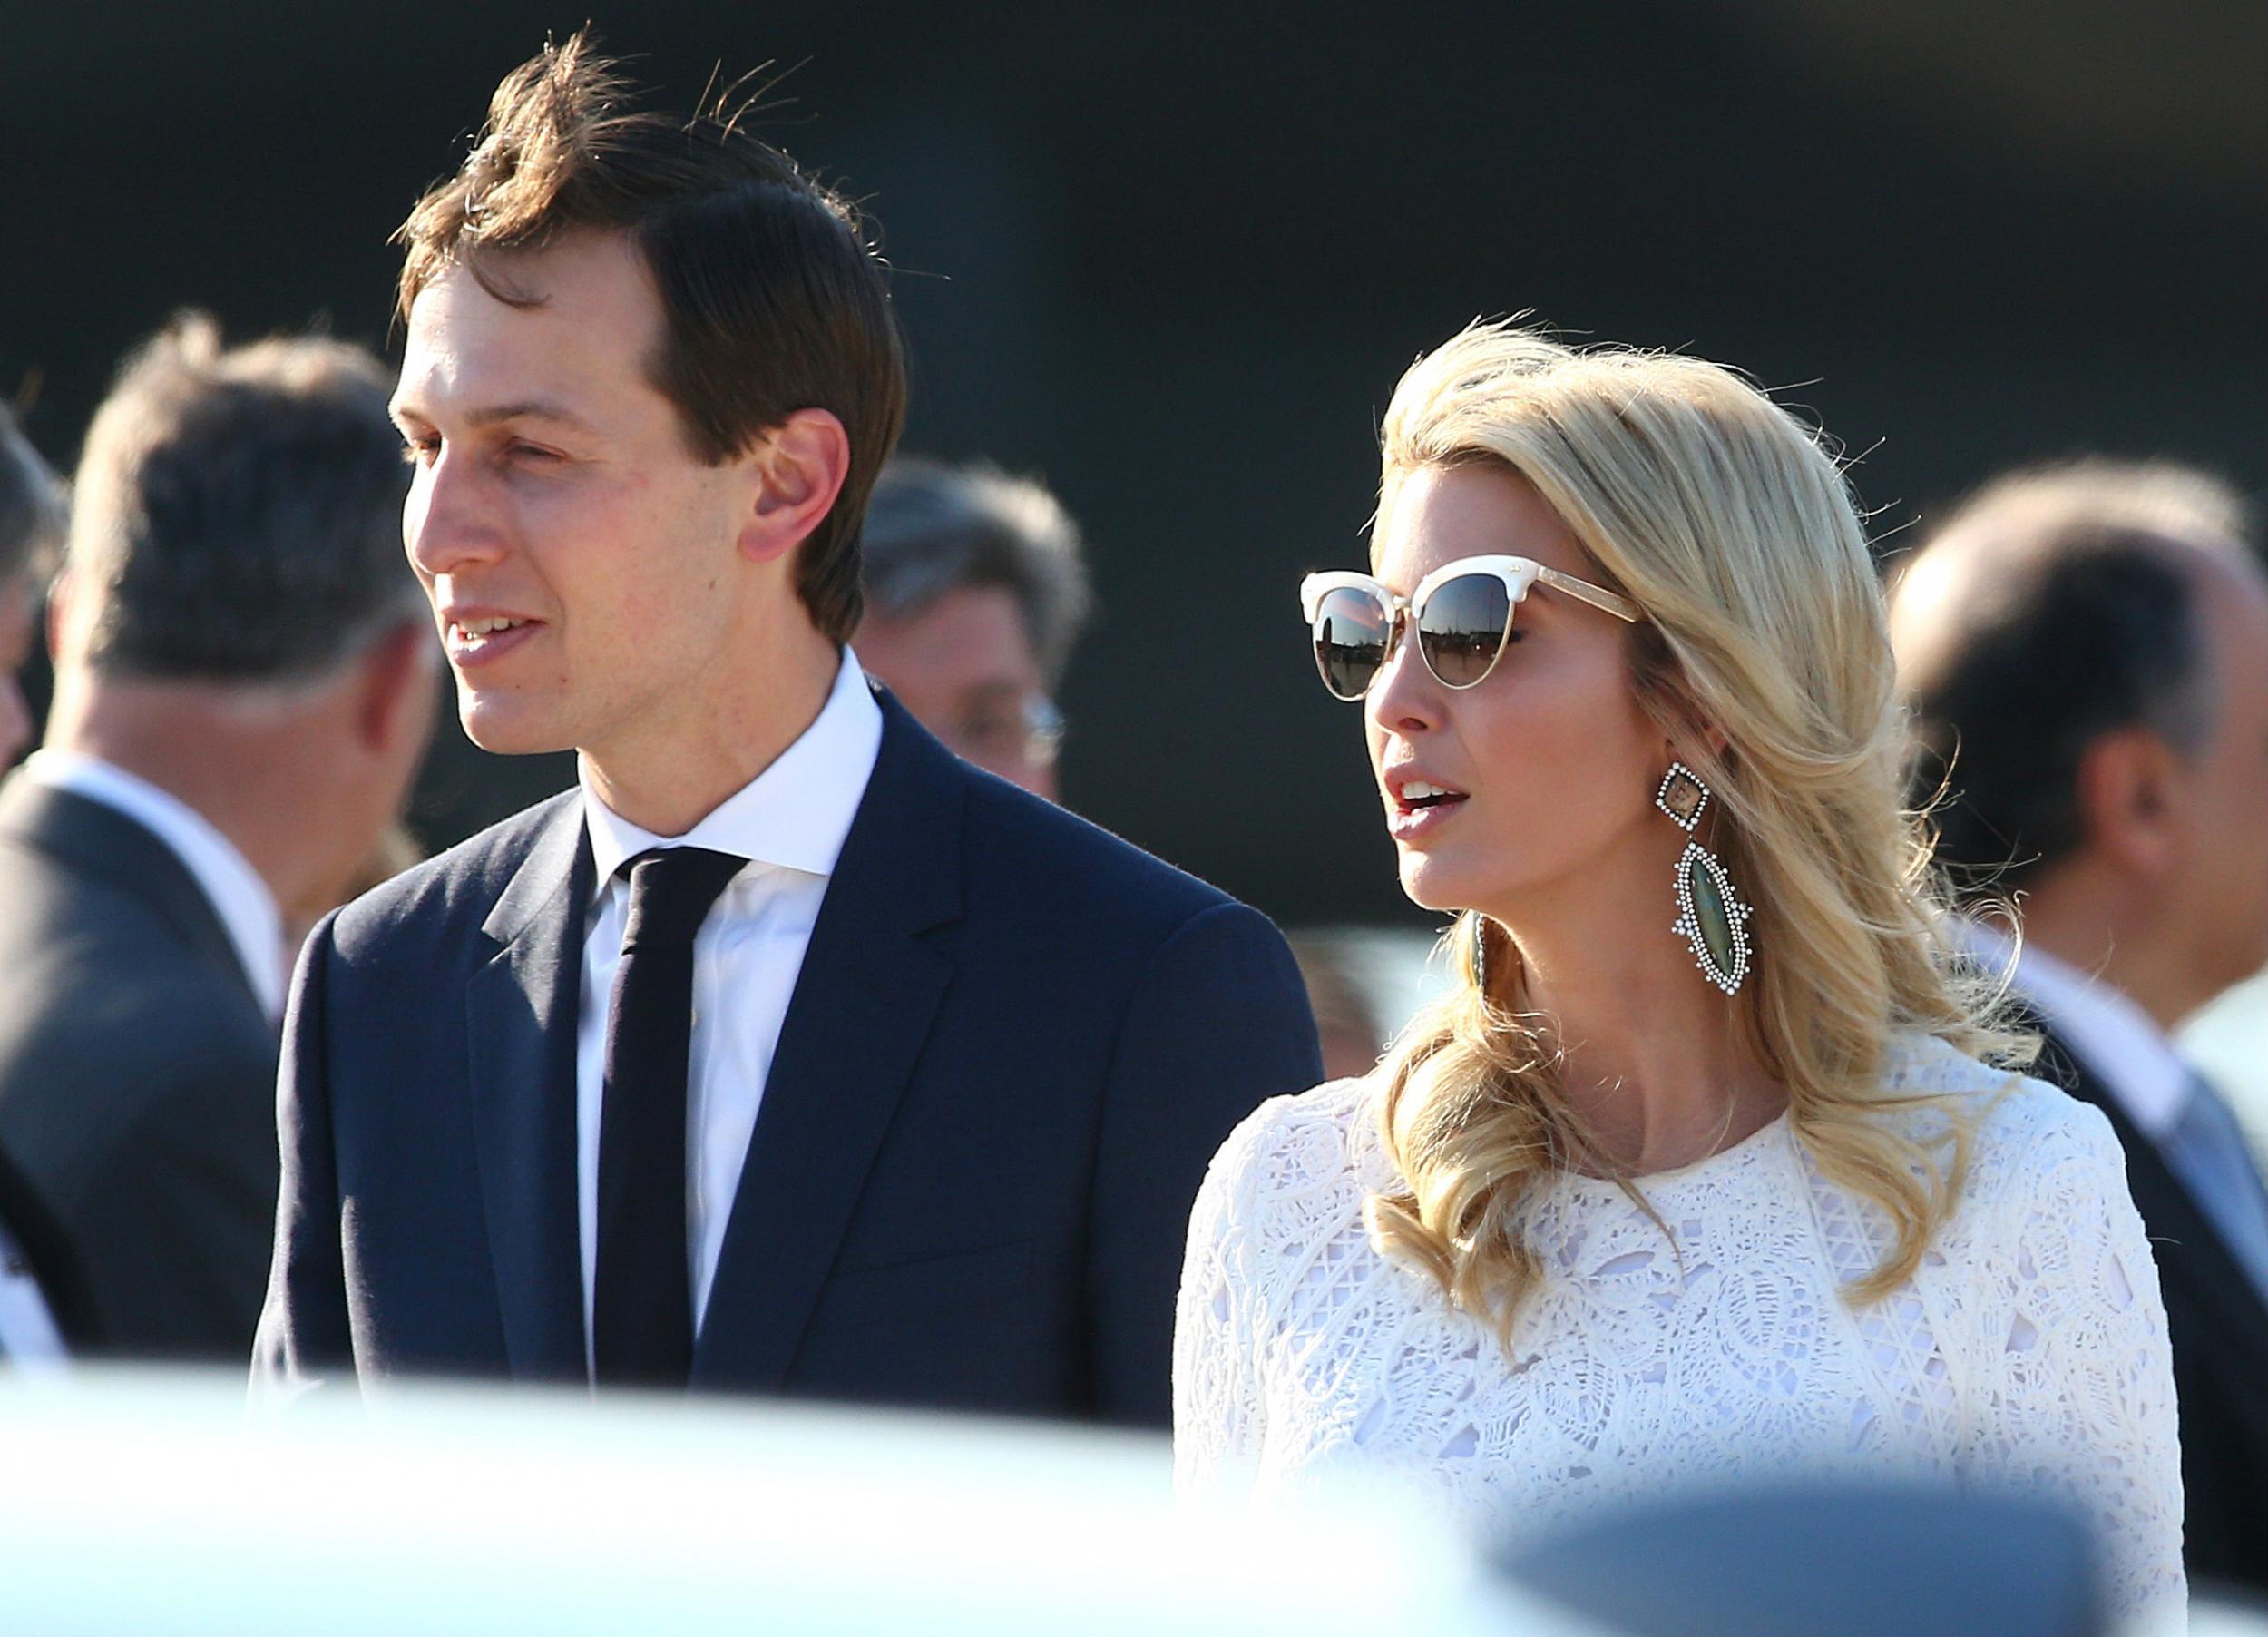 There are few people Mr Trump trusts more than his eldest daughter and her husband